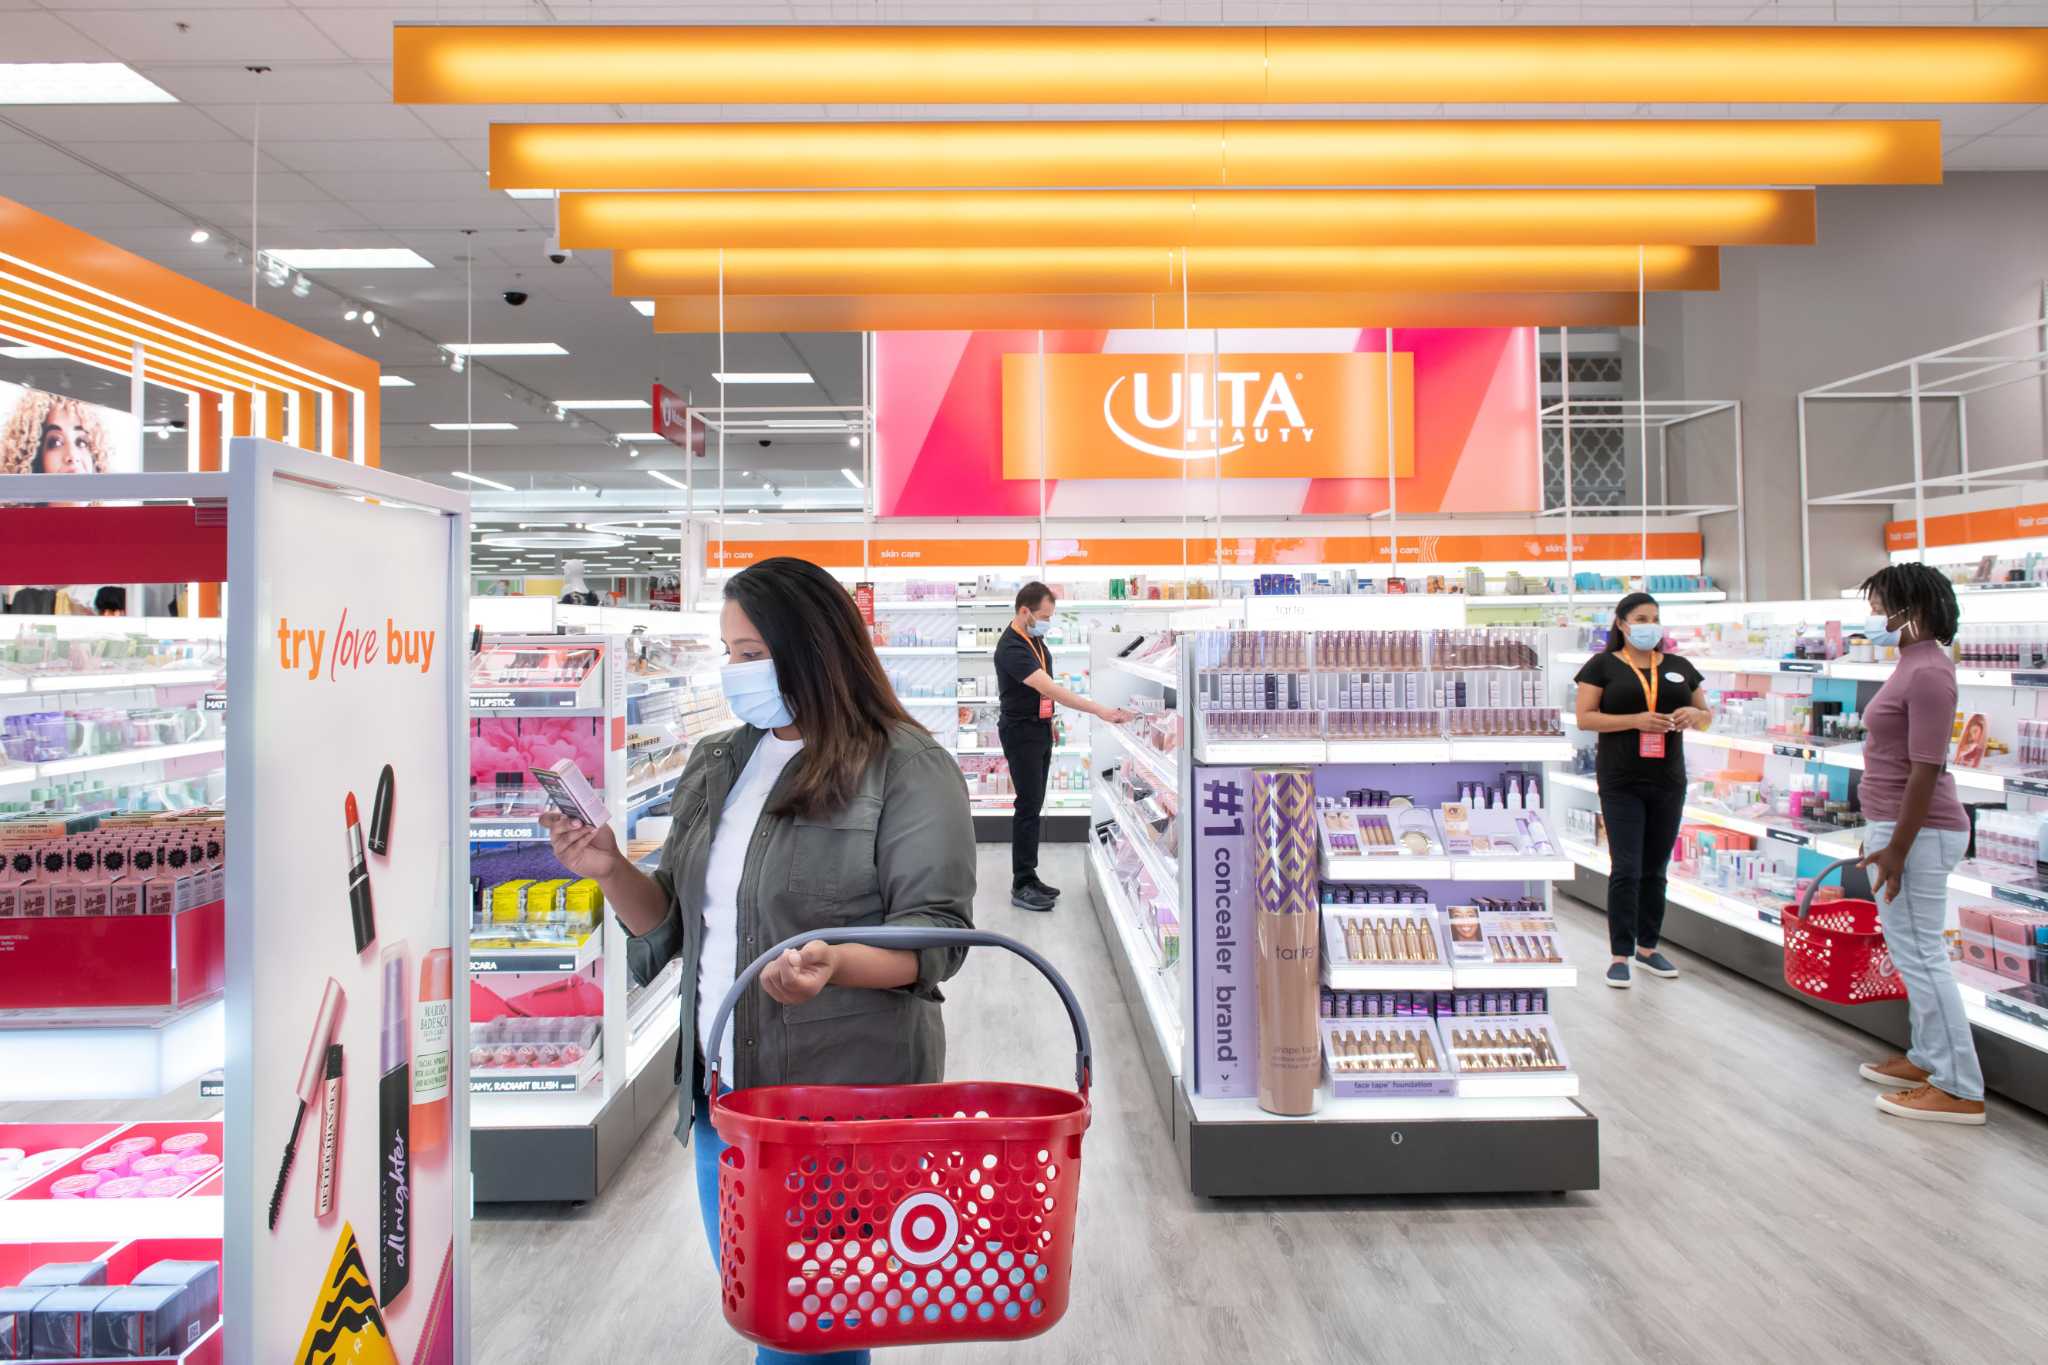 Ulta begins opening inside select Target stores in greater Houston